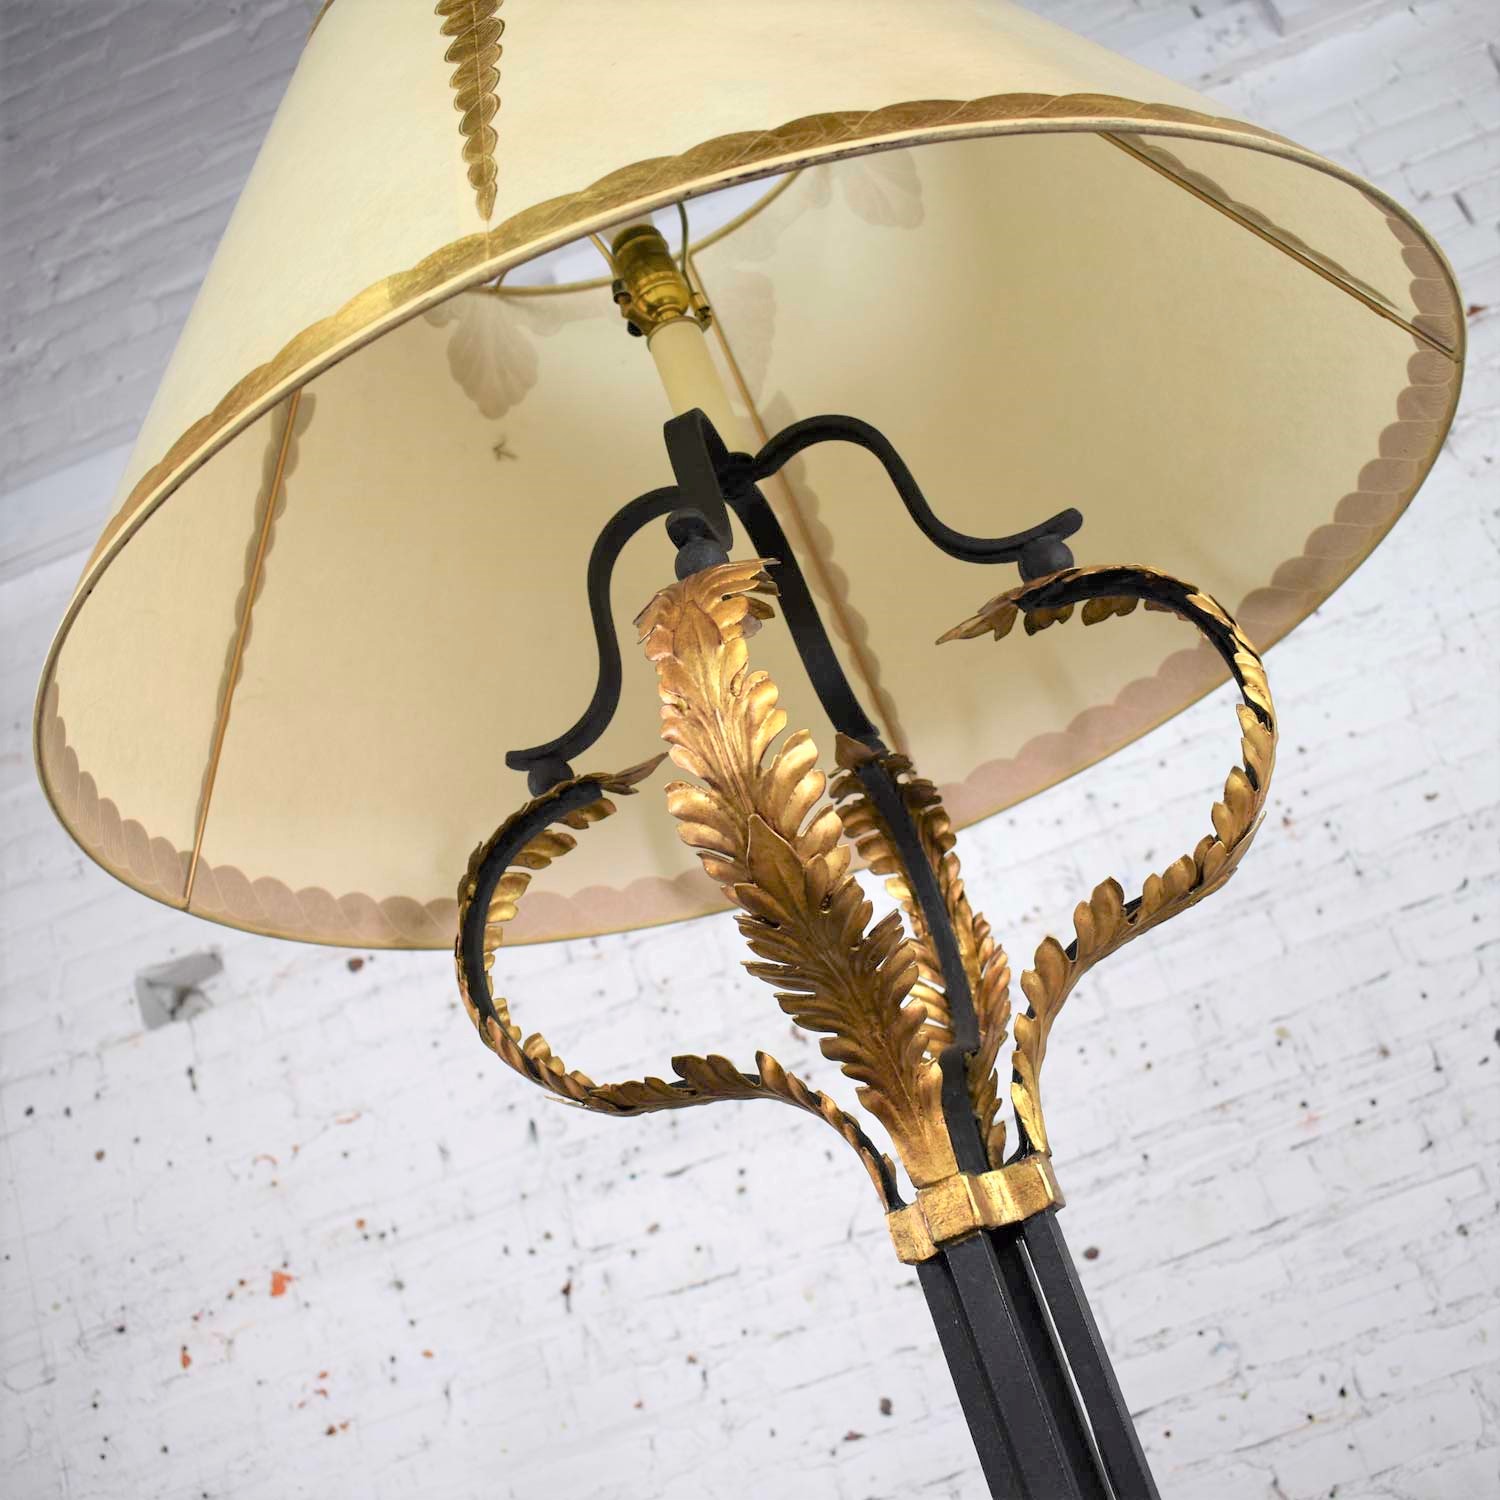 Monumental Neoclassical Style Iron Floor Lamp with Acanthus Leaf Design & Parchment Shade